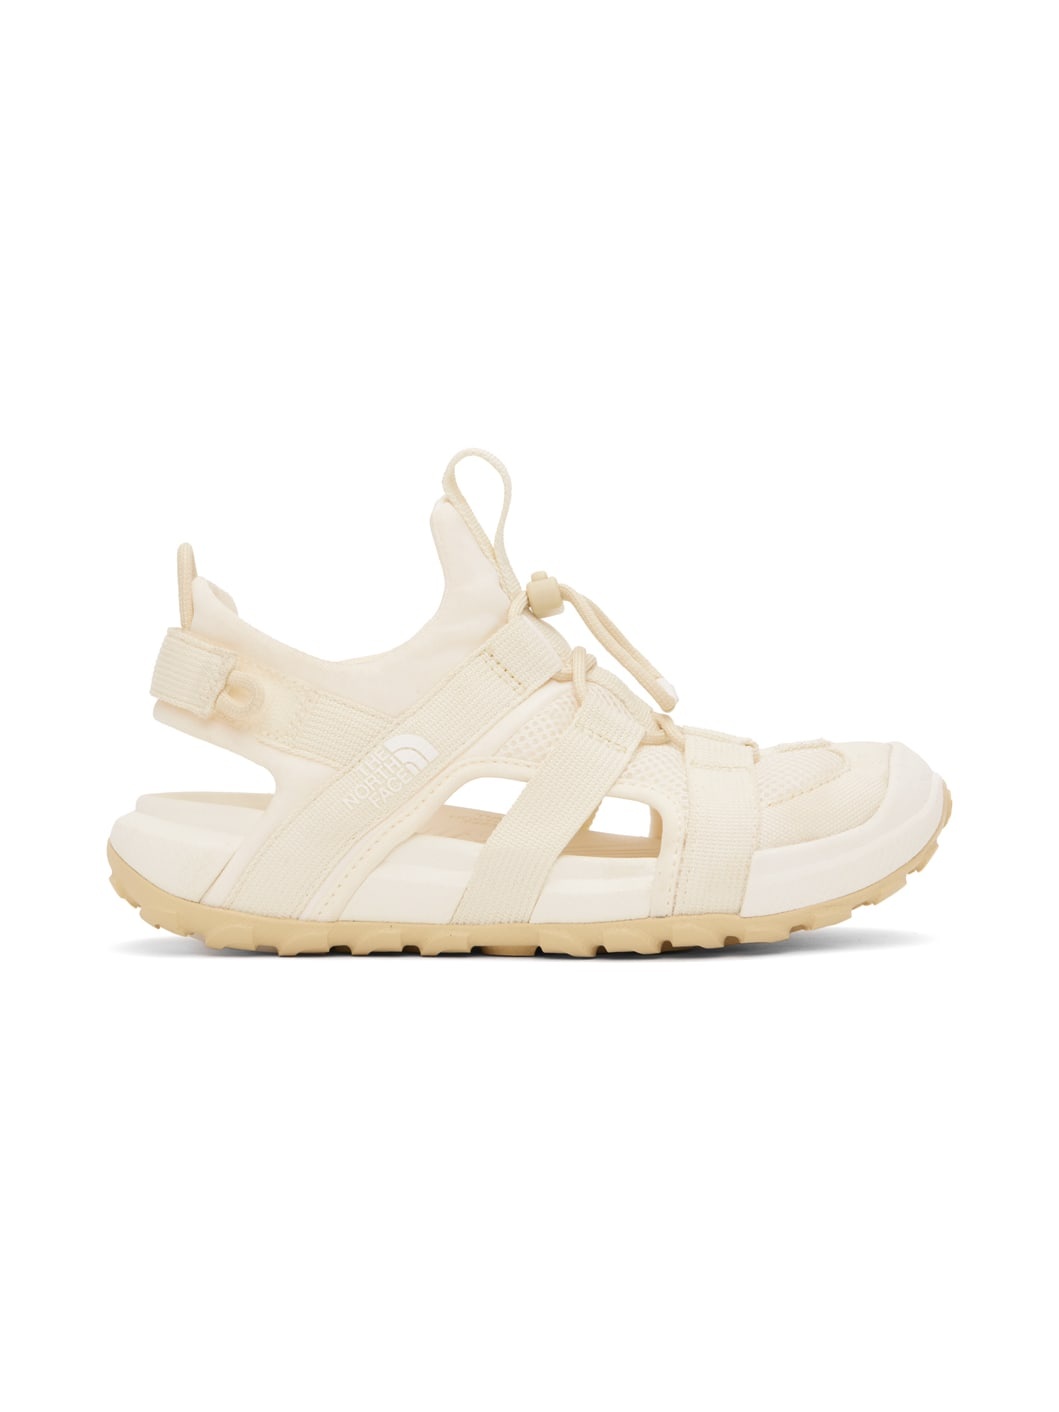 Off-White Explore Camp Sneakers - 1